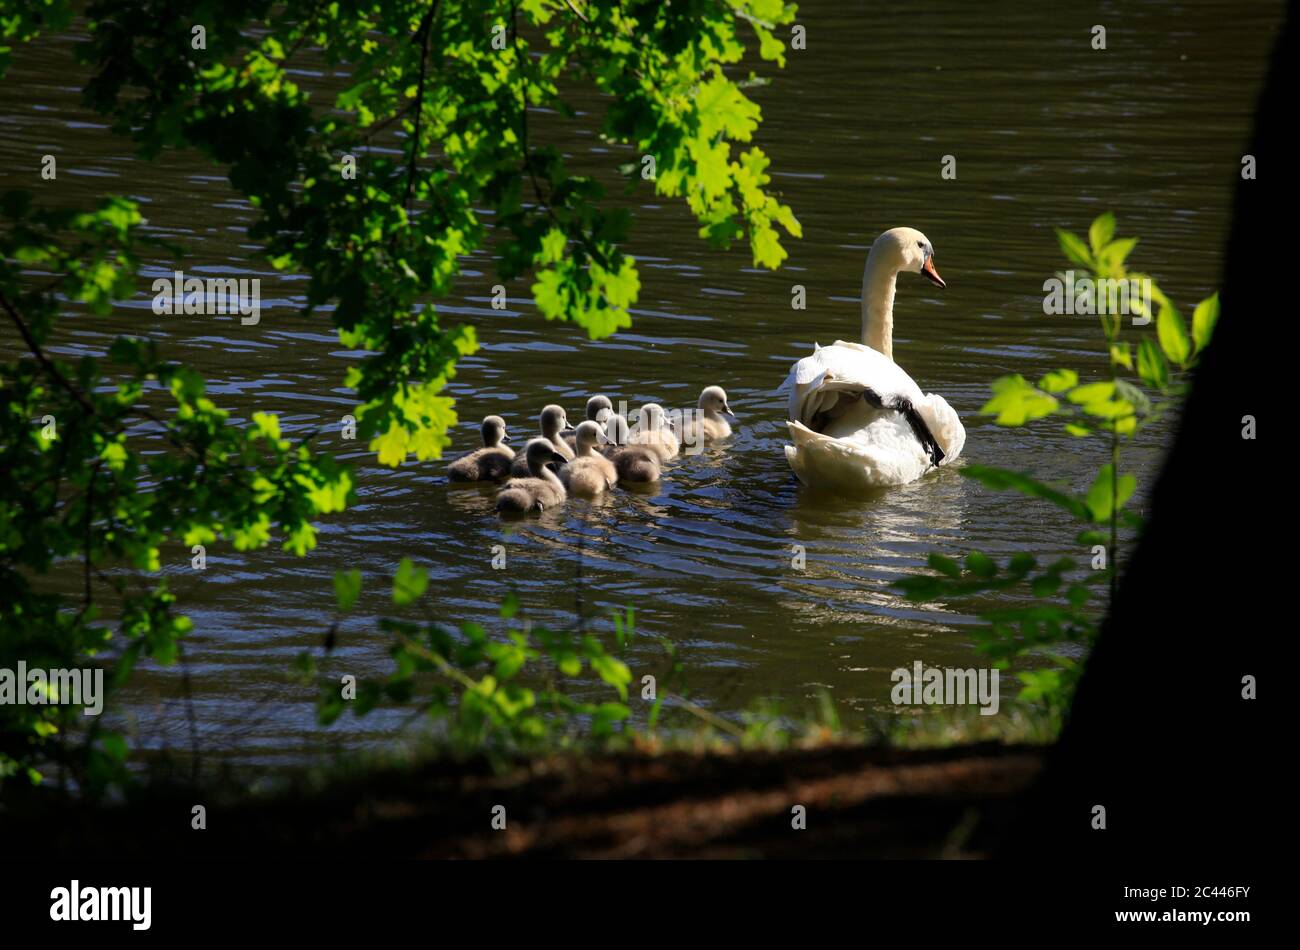 Germany, Saxony, Adult swan swimming in lake with cygnets Stock Photo